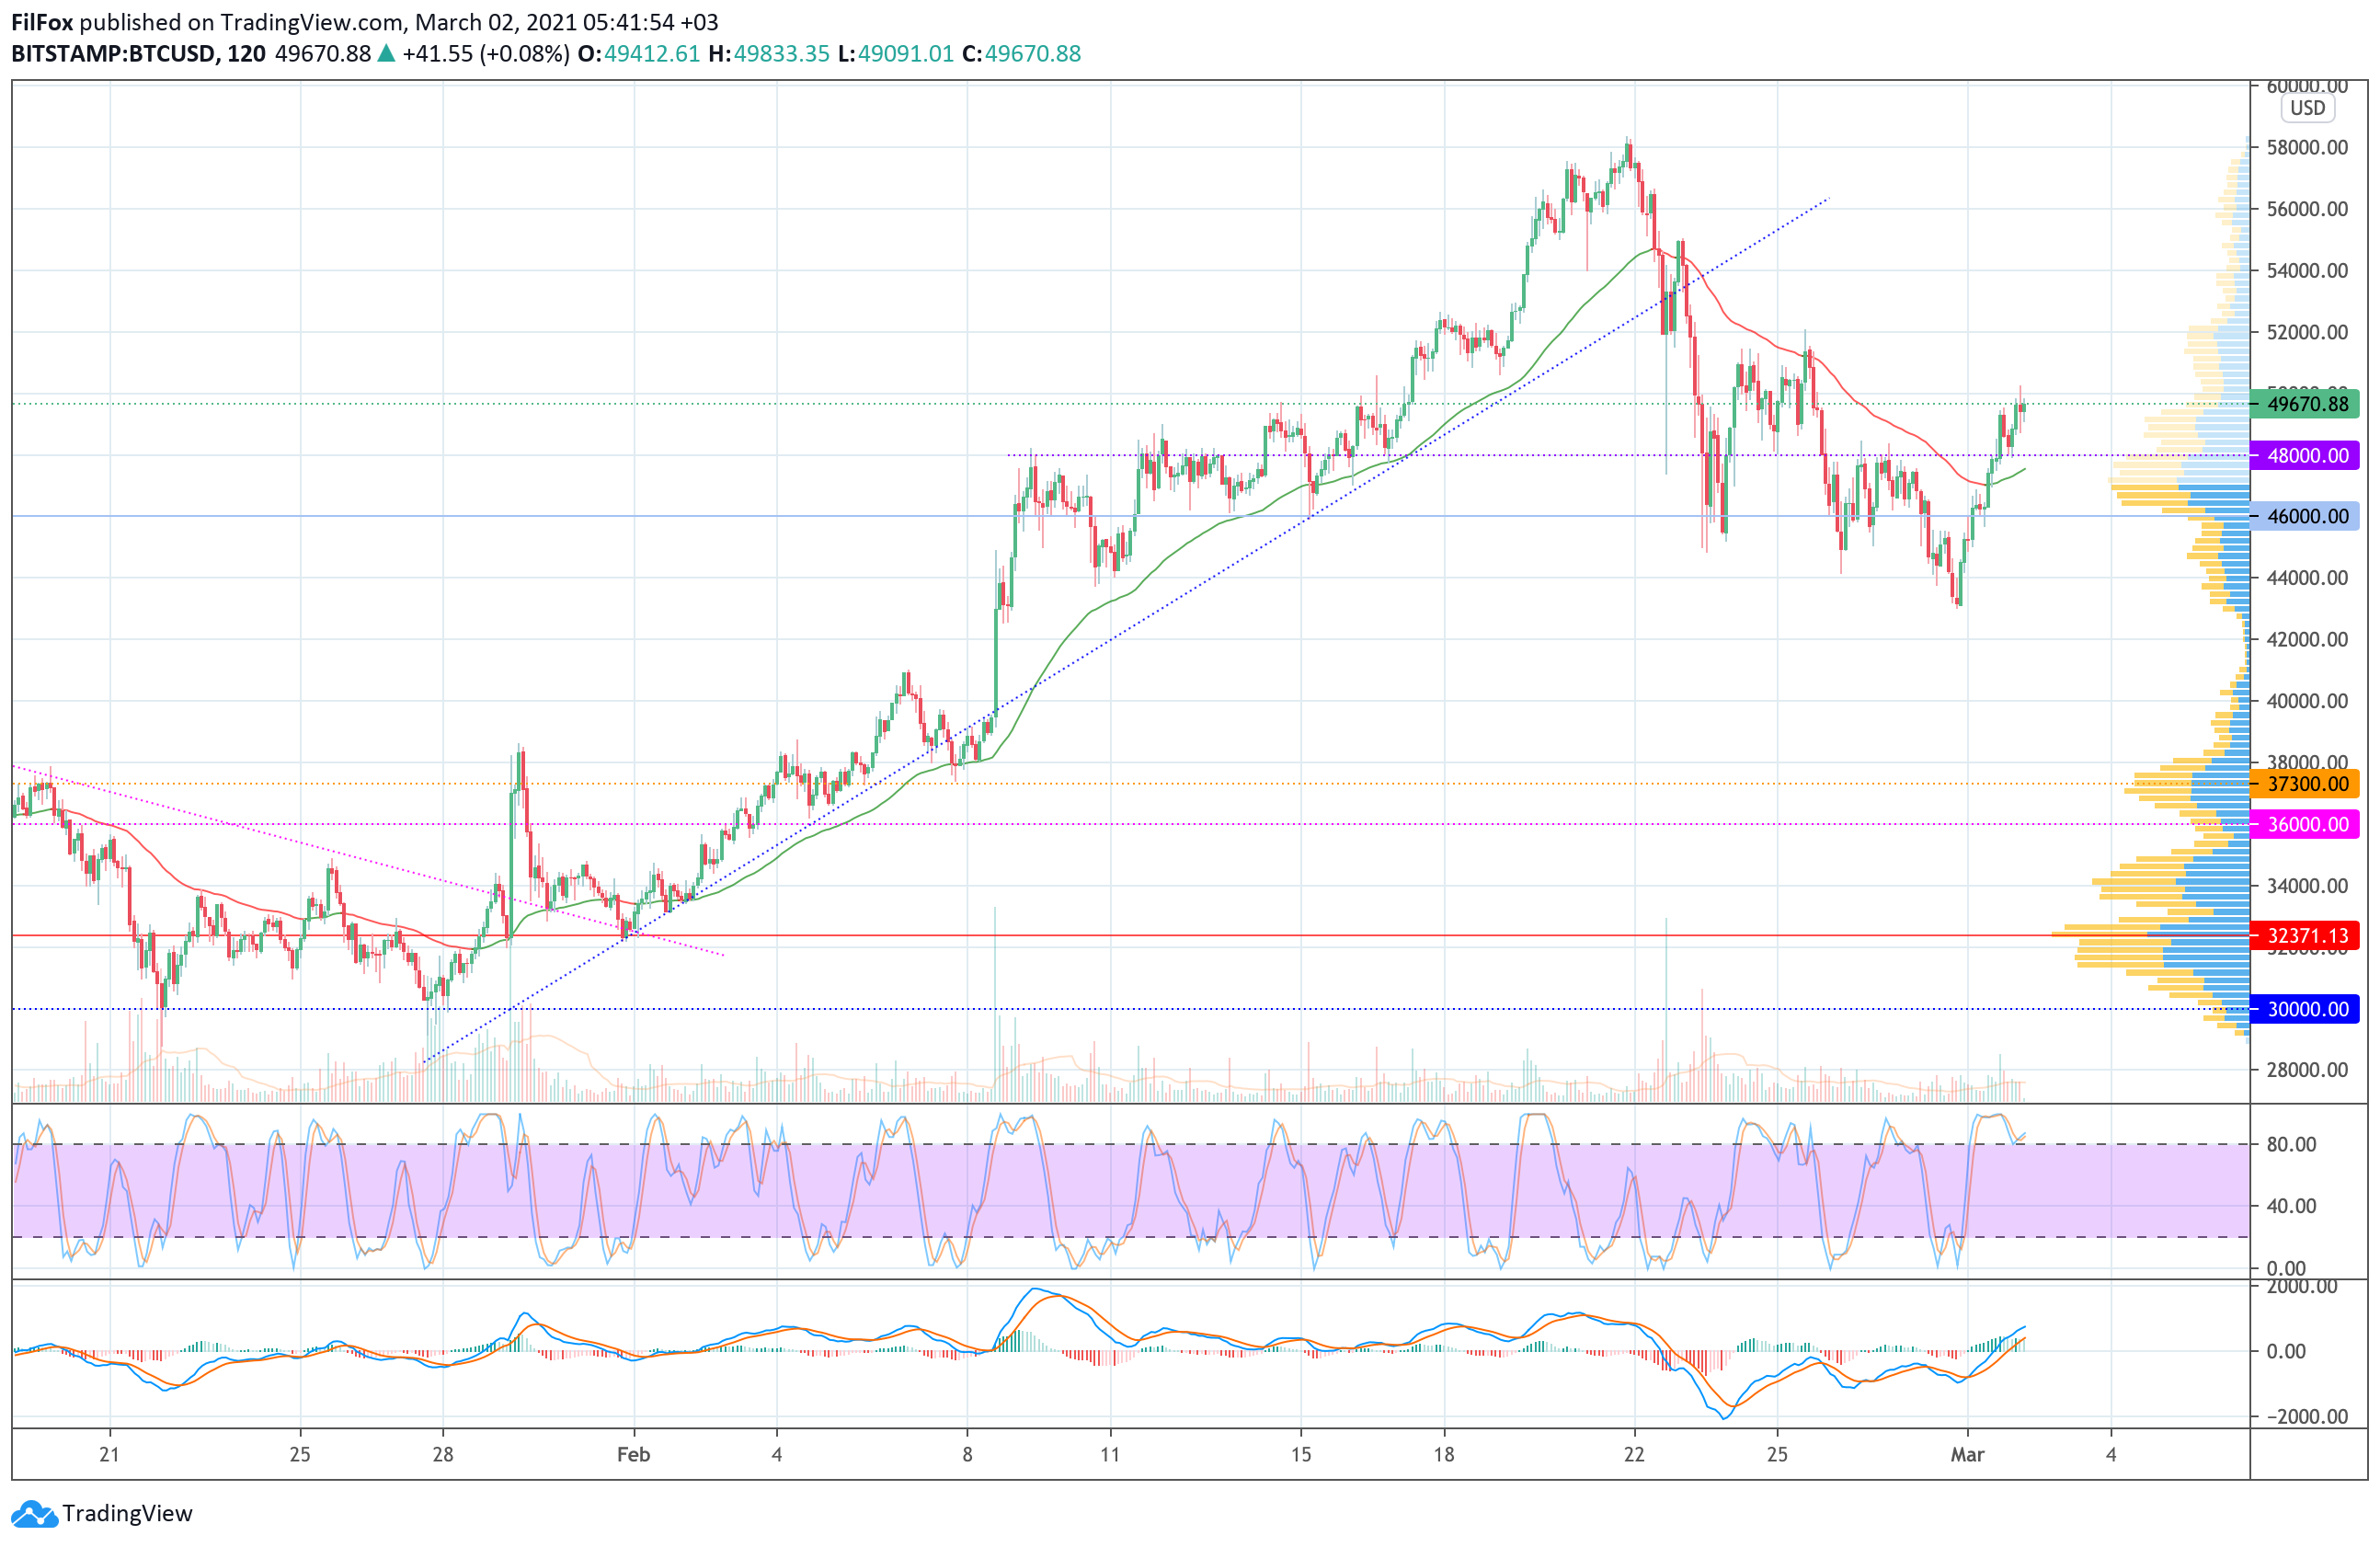 Analysis of prices for Bitcoin, Ethereum, XRP for 03/02/2021